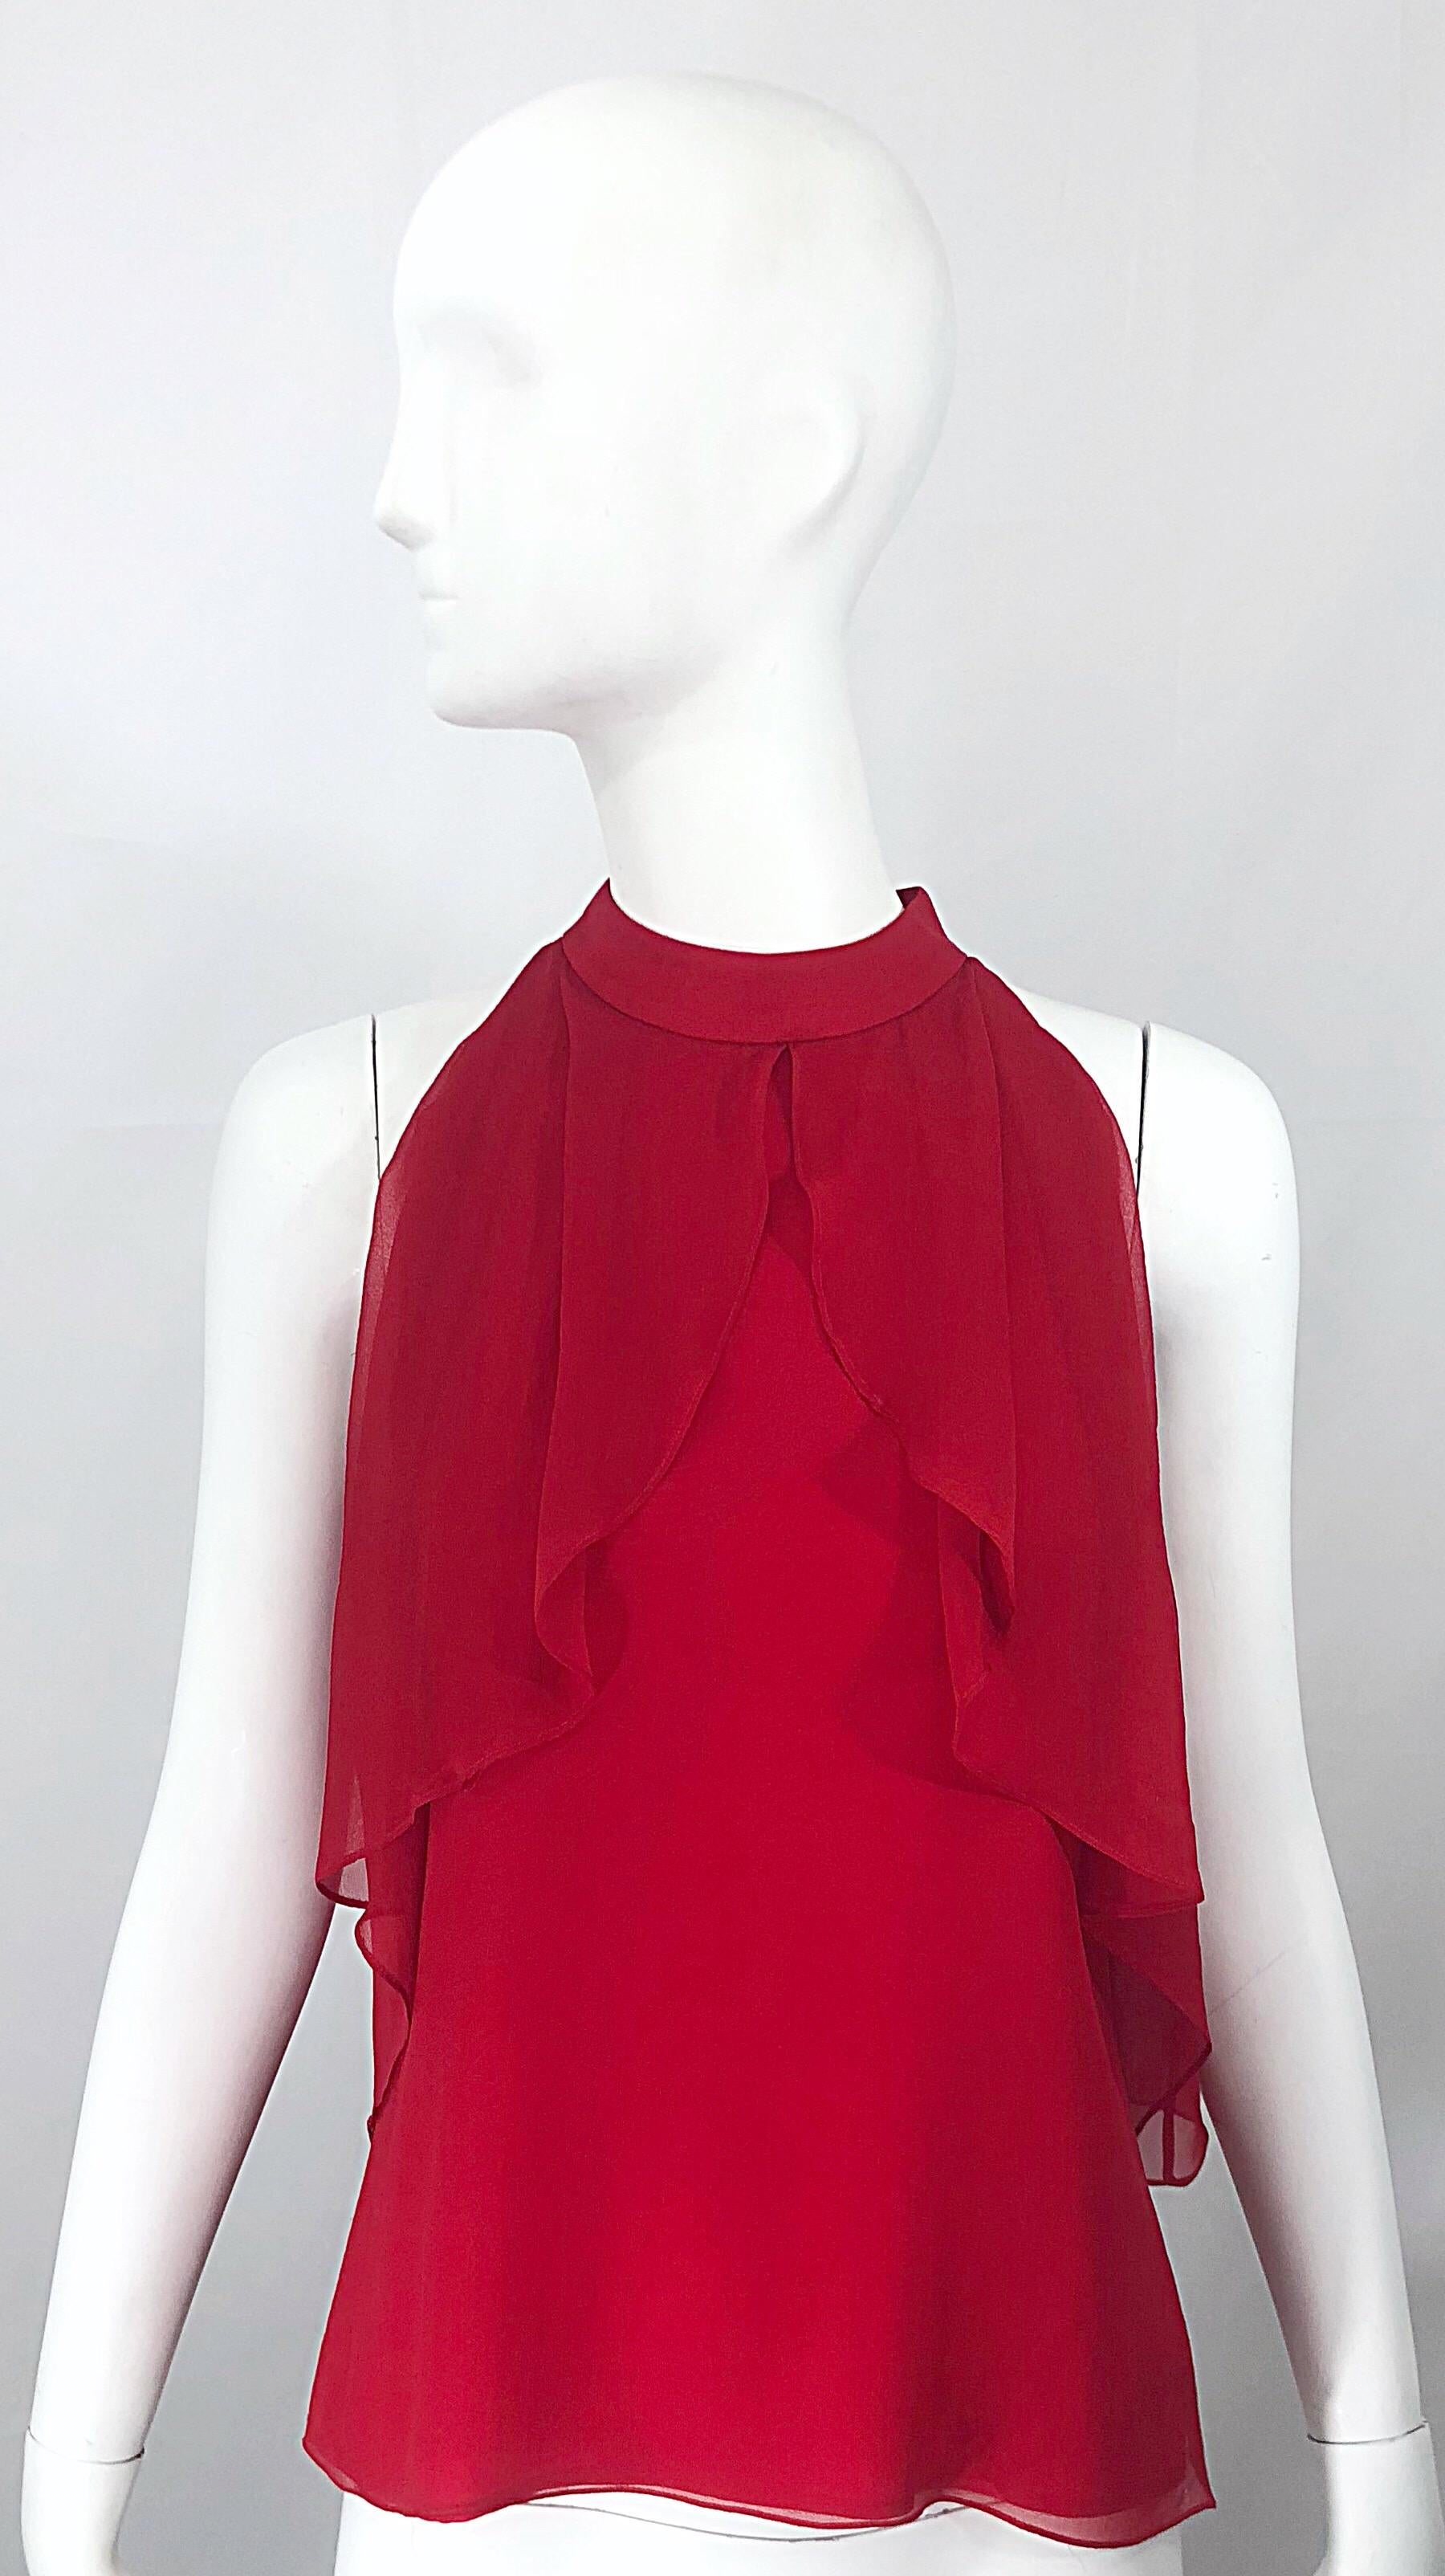 Christopher Dean Early 2000s Lipstick Red Size 4 Silk Chiffon Blouse Top For Sale 4